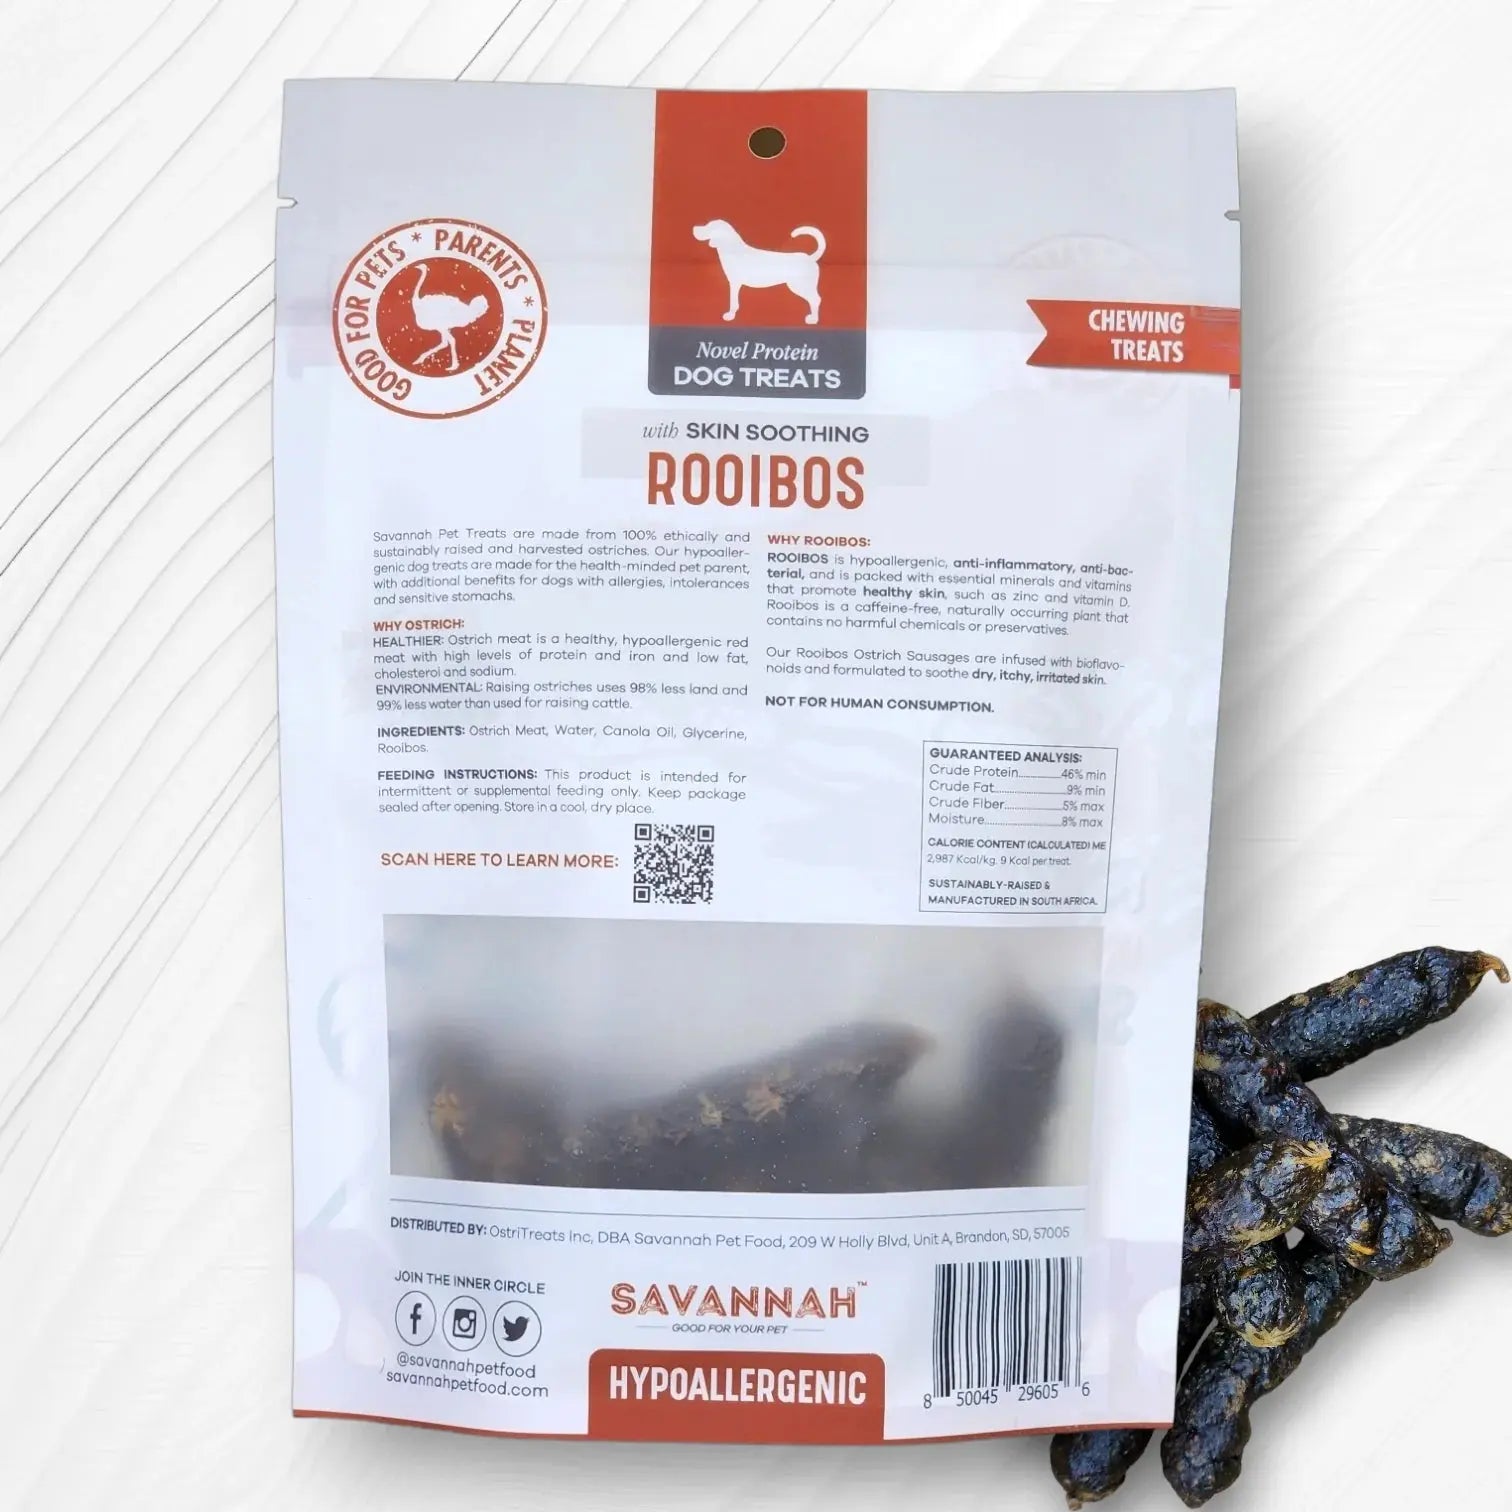 Savannah - Hypoallergenic Ostrich Sausages. Dog Treats with Skin Soothing Rooibos Savannah Pet Food